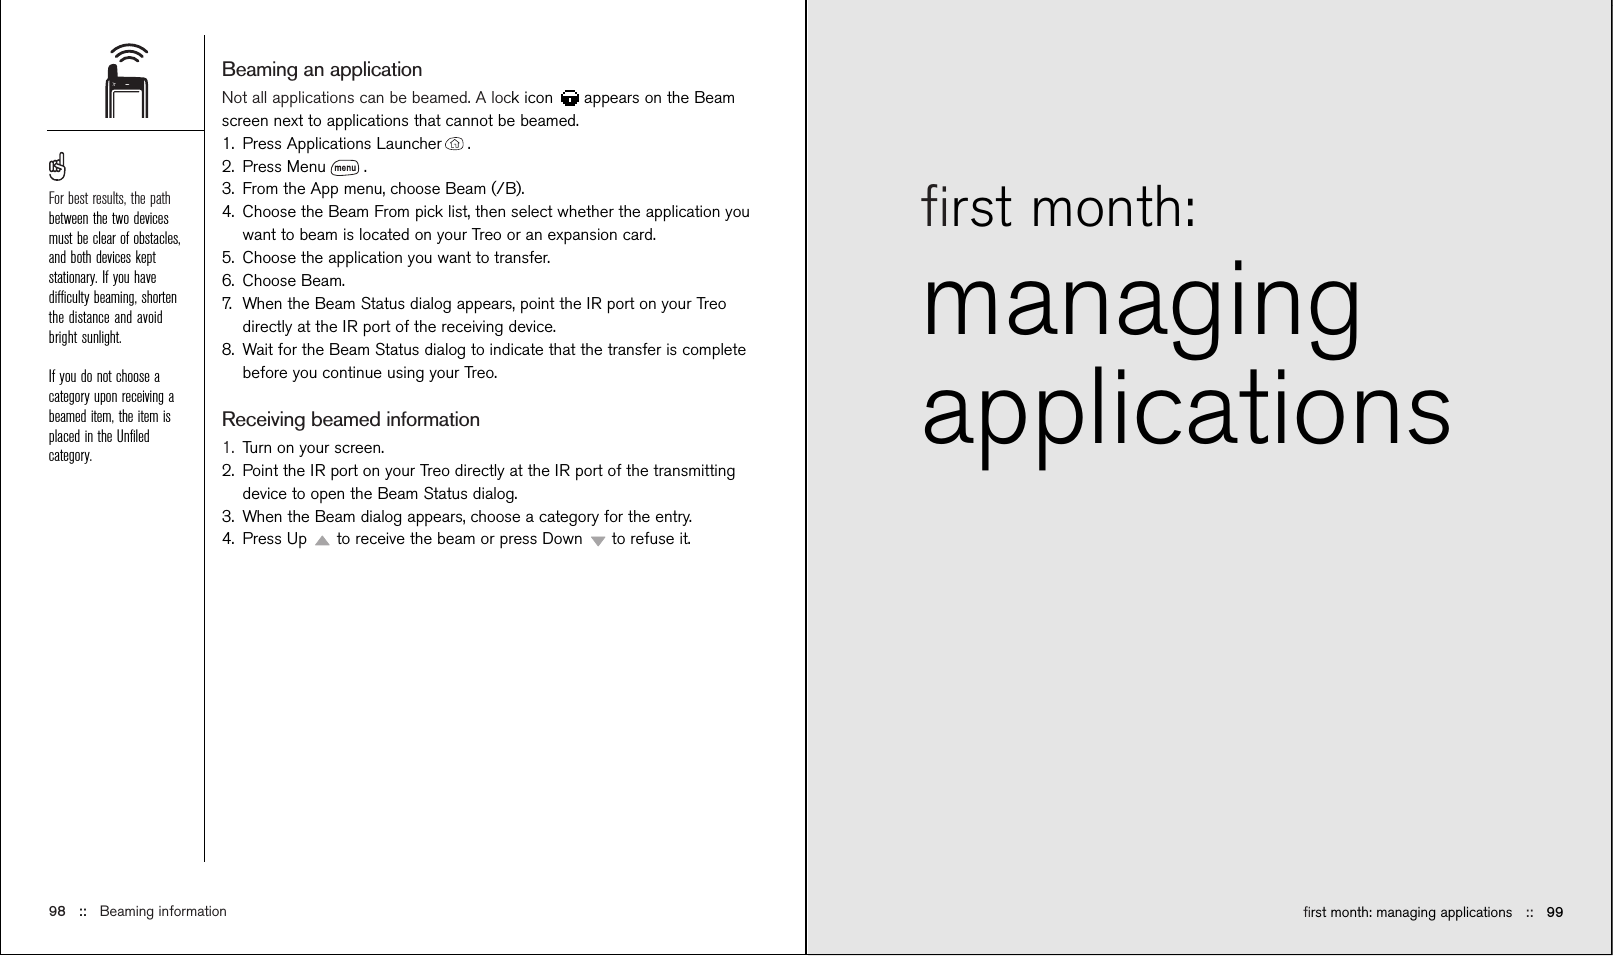 ﬁrst month: managing applications ::   99ﬁrst month:managingapplications Beaming an applicationNot all applications can be beamed. A lock icon  appears on the Beamscreen next to applications that cannot be beamed.1. Press Applications Launcher .2. Press Menu .3. From the App menu, choose Beam (/B).4. Choose the Beam From pick list, then select whether the application youwant to beam is located on your Treo or an expansion card.5. Choose the application you want to transfer.6. Choose Beam.7. When the Beam Status dialog appears, point the IR port on your Treodirectly at the IR port of the receiving device.8. Wait for the Beam Status dialog to indicate that the transfer is completebefore you continue using your Treo.Receiving beamed information1. Turn on your screen.2. Point the IR port on your Treo directly at the IR port of the transmittingdevice to open the Beam Status dialog.3. When the Beam dialog appears, choose a category for the entry.4. Press Up  to receive the beam or press Down  to refuse it.98 ::   Beaming informationFor best results, the pathbetween the two devicesmust be clear of obstacles,and both devices keptstationary. If you havedifﬁculty beaming, shortenthe distance and avoidbright sunlight.If you do not choose acategory upon receiving abeamed item, the item isplaced in the Unﬁledcategory.